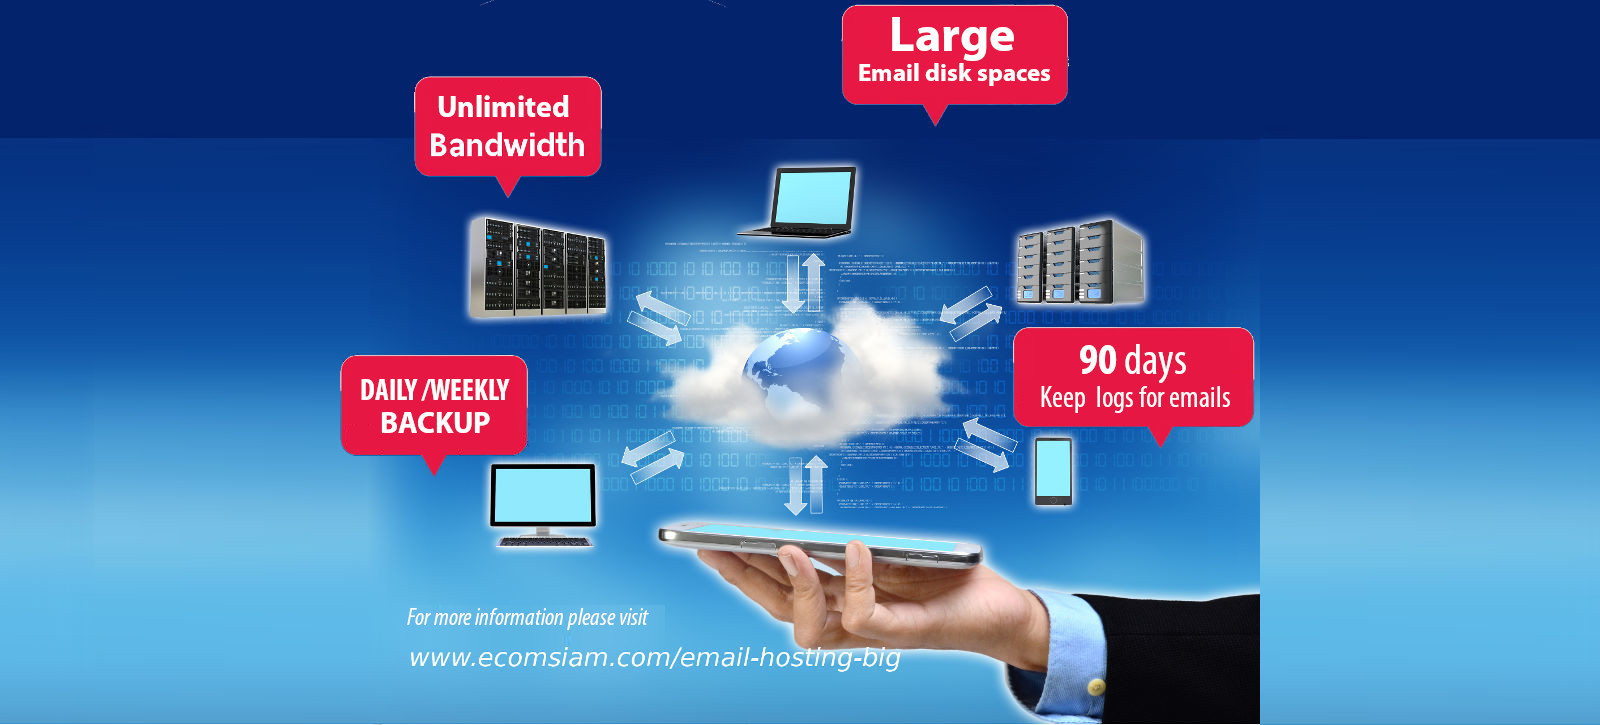 email web hosting thailand with Cpanel Whm /free SSL /20GB disk spaces only 3000 baht/year - cheap email hosting ,very best service and customer support by  ecomsiam